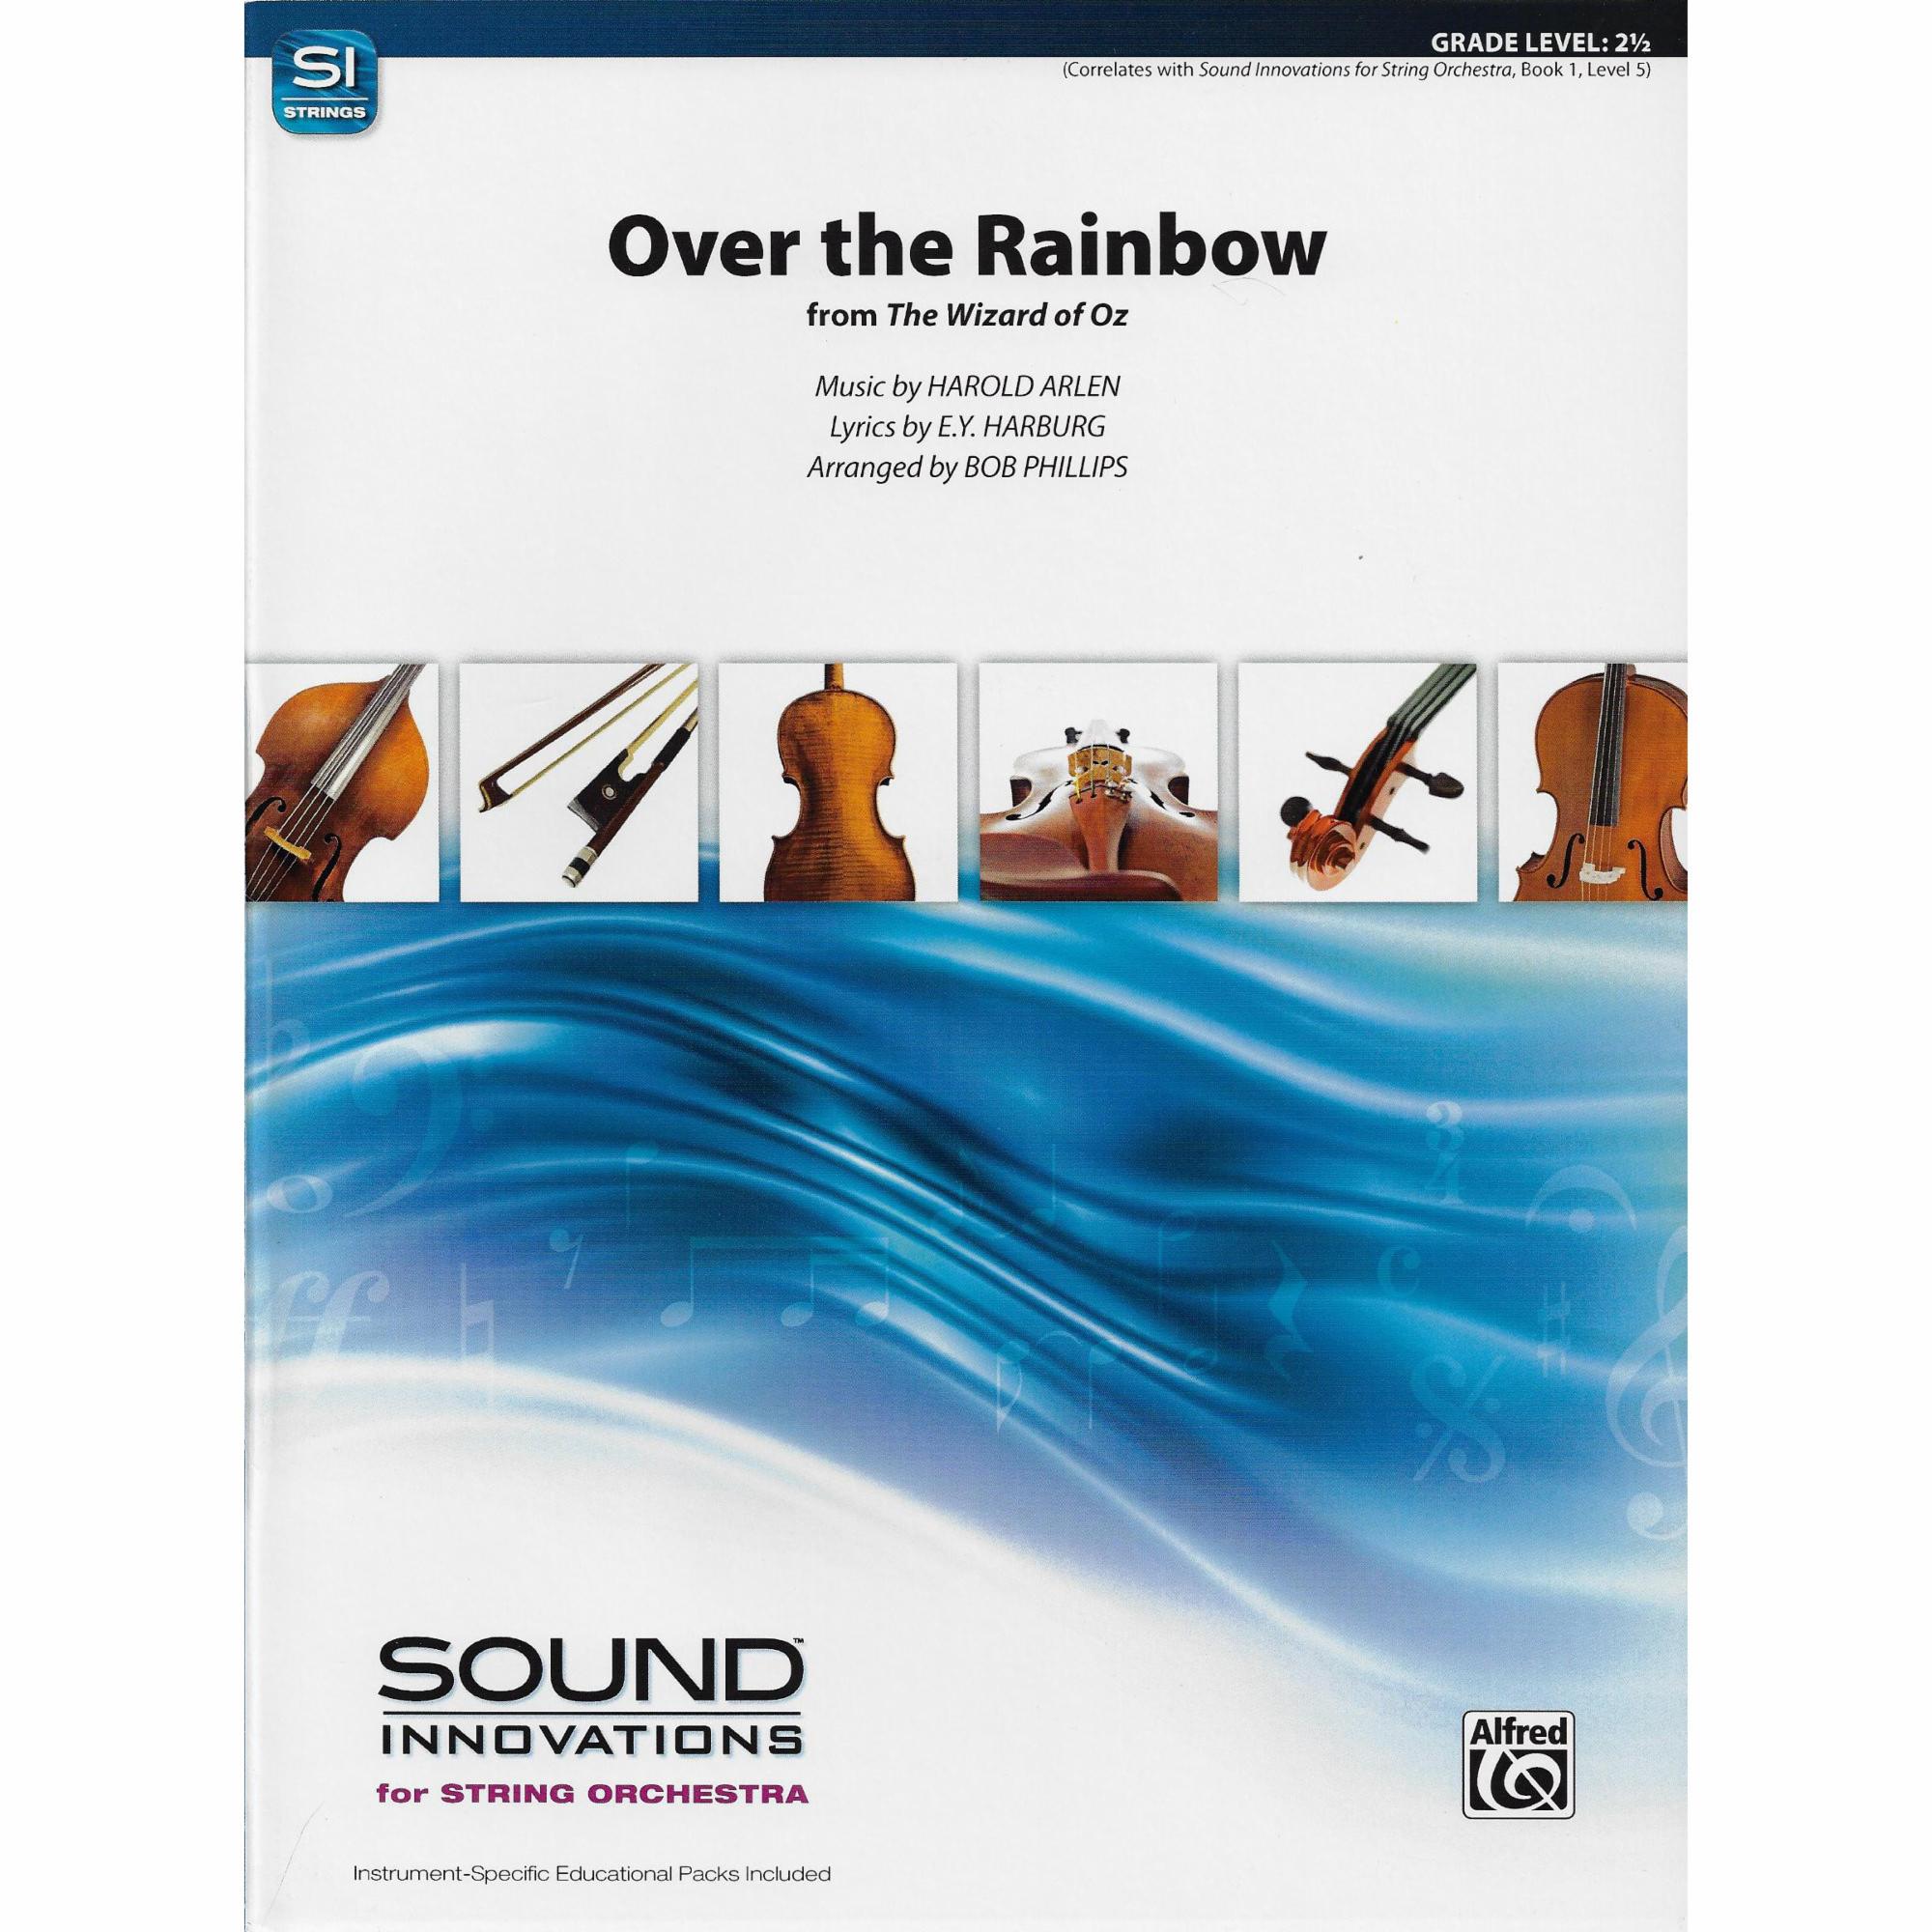 Over the Rainbow, from The Wizard of Oz for String Orchestra